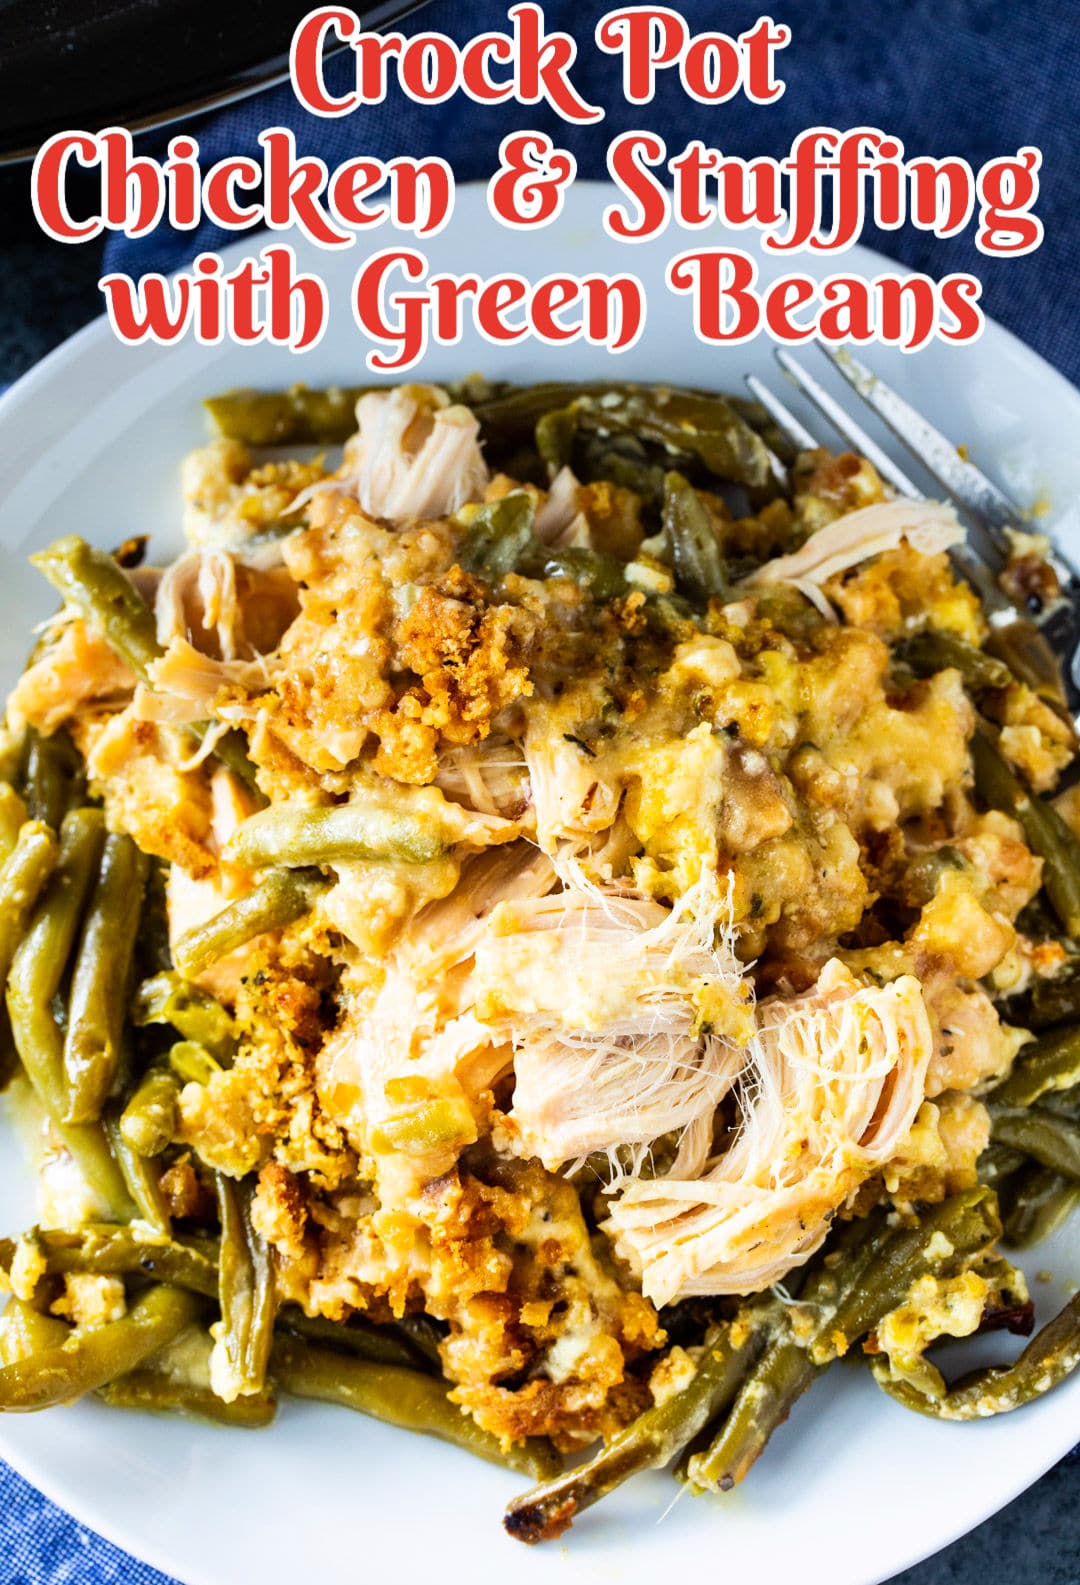 Crock Pot Chicken and Stuffing with Green Beans dished up on plate.